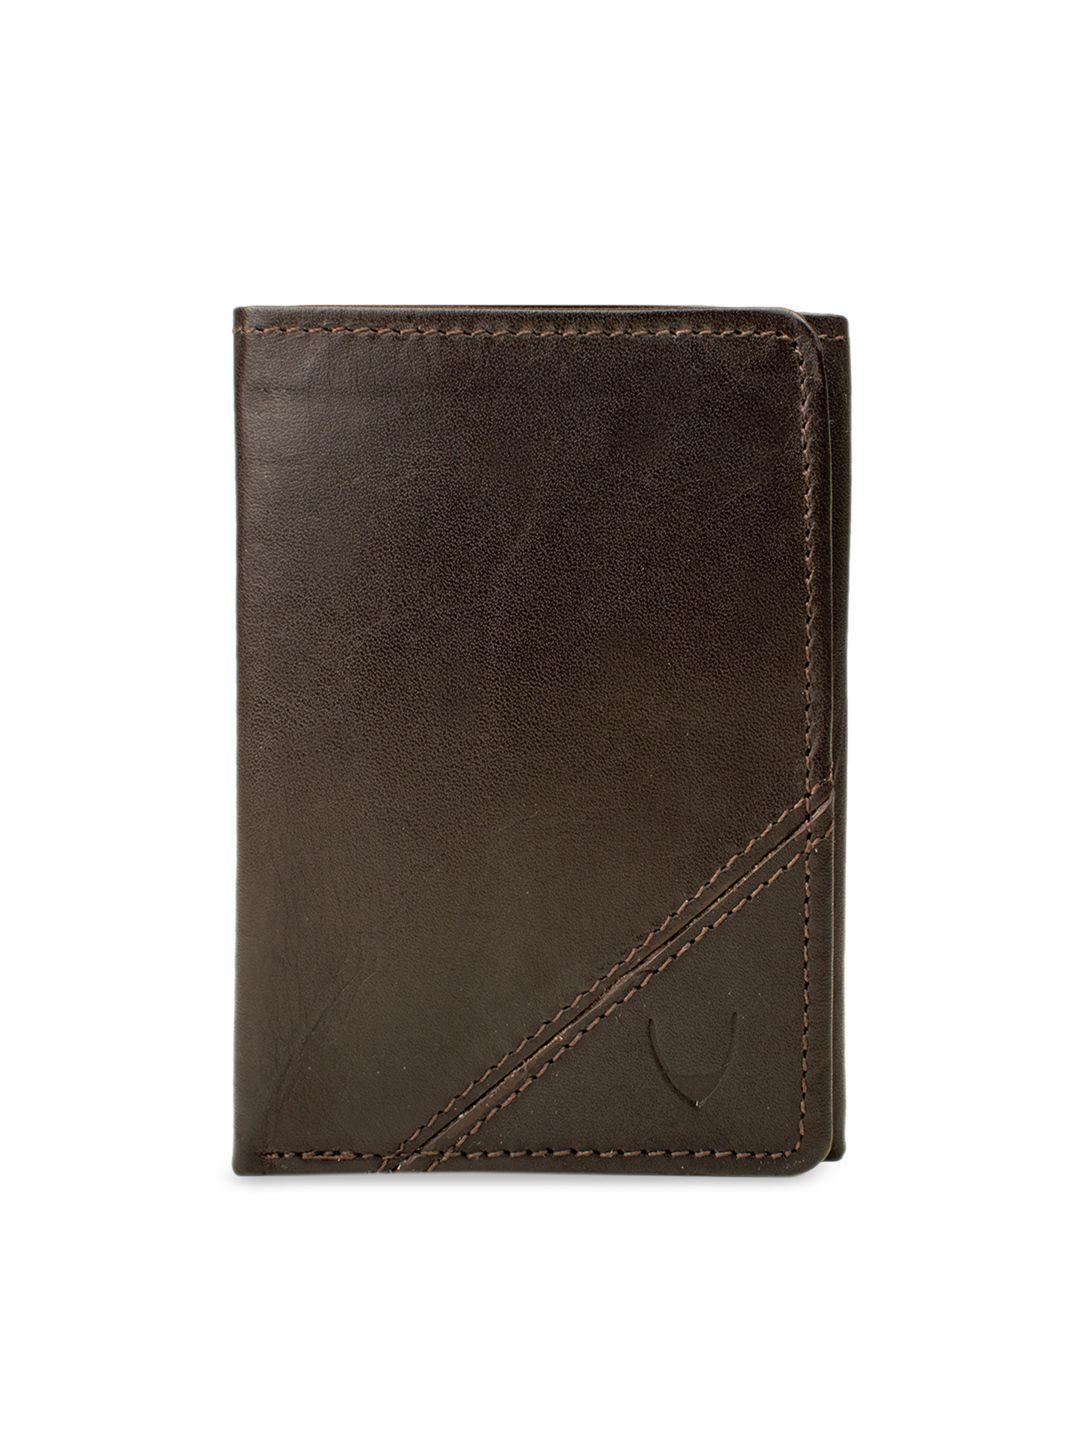 hidesign men brown solid three fold leather wallet